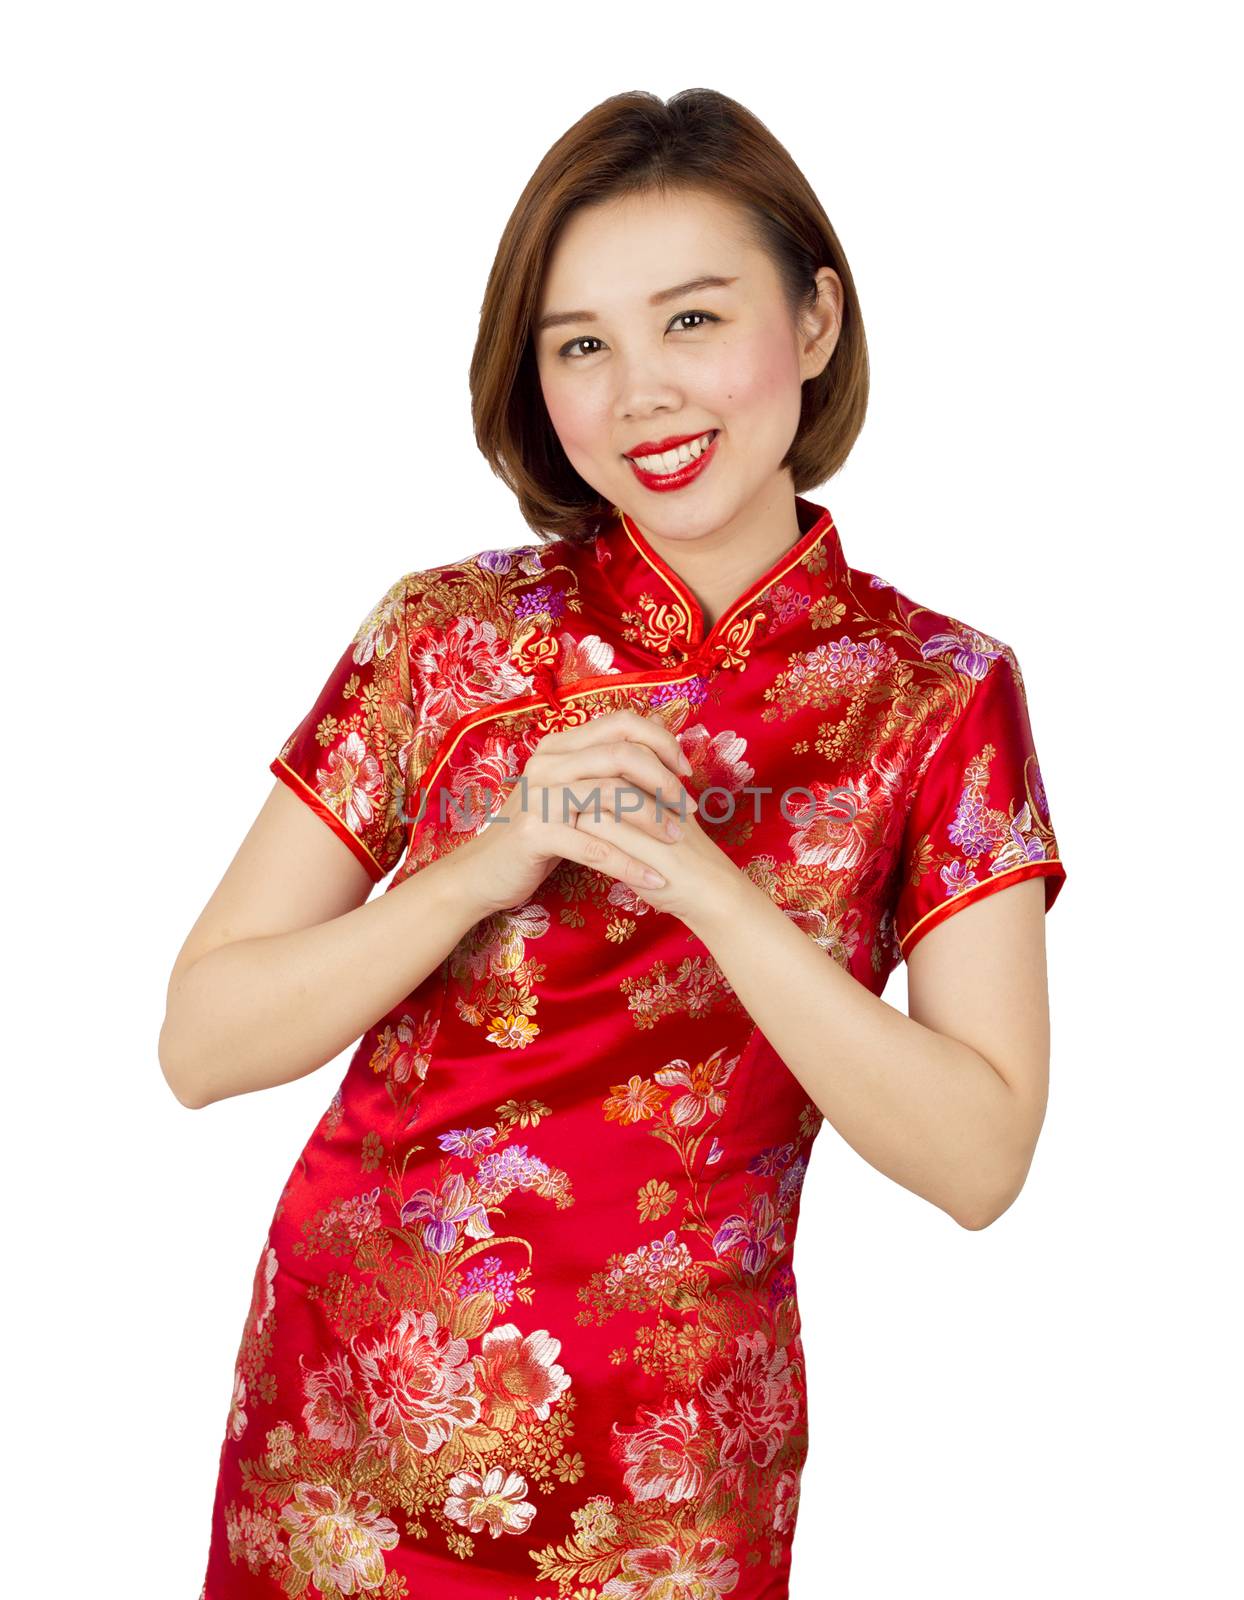 Asian women wishing you  a happy Chinese new year with tradition by jayzynism